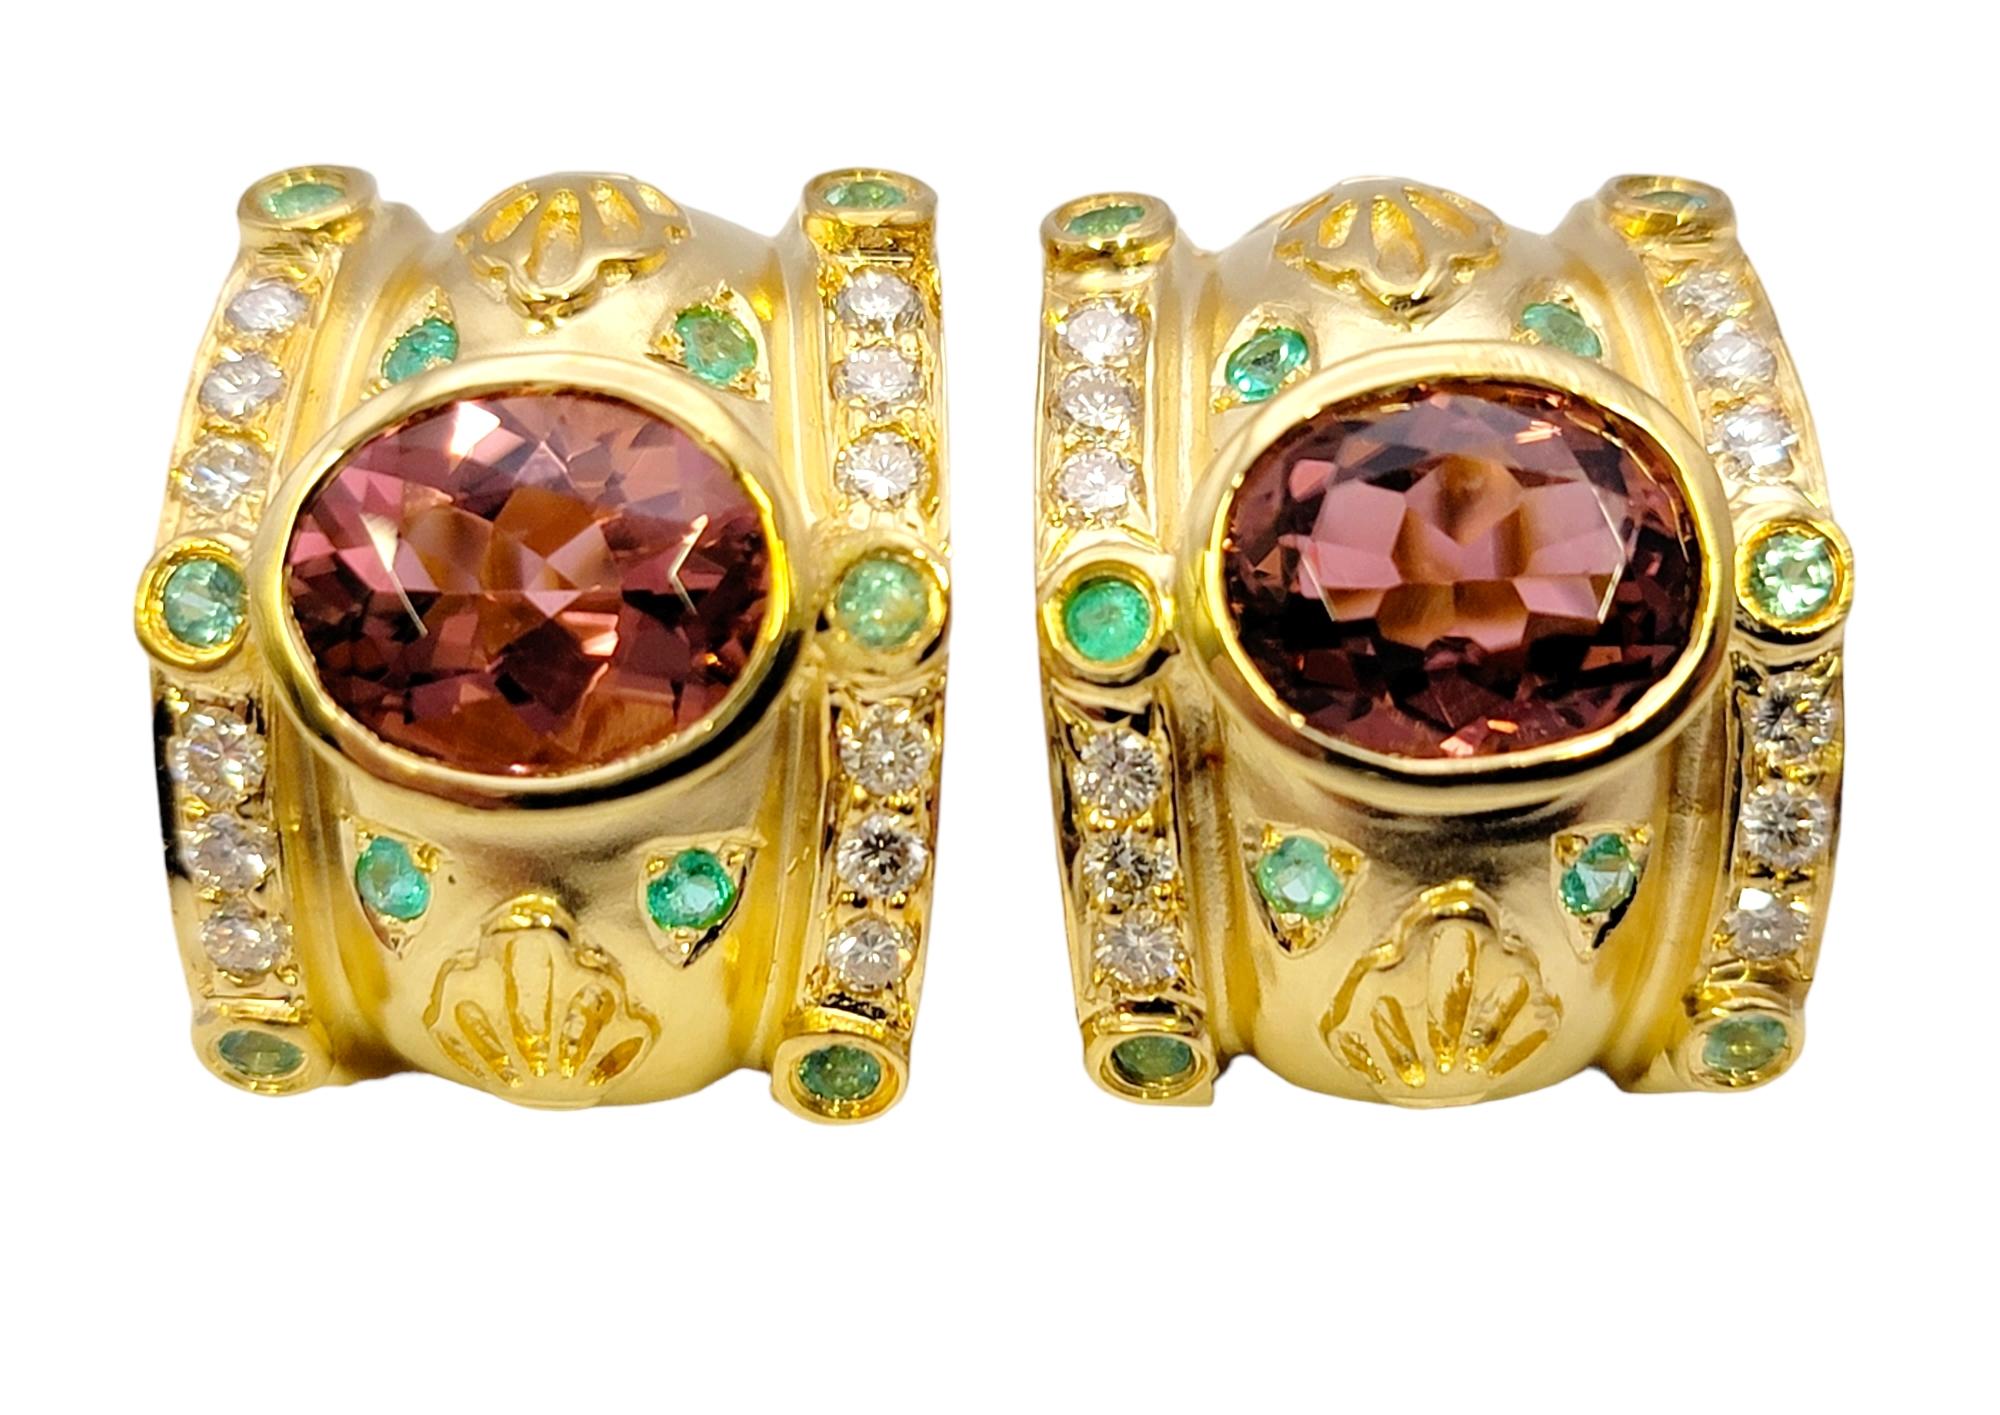 Gorgeous Etruscan style half-hoop earrings featuring vibrant tourmaline gemstones and diamonds. These stunning, ornate earrings are bursting with bold color and design. The incredible pink, green and white stones paired with the rich yellow gold